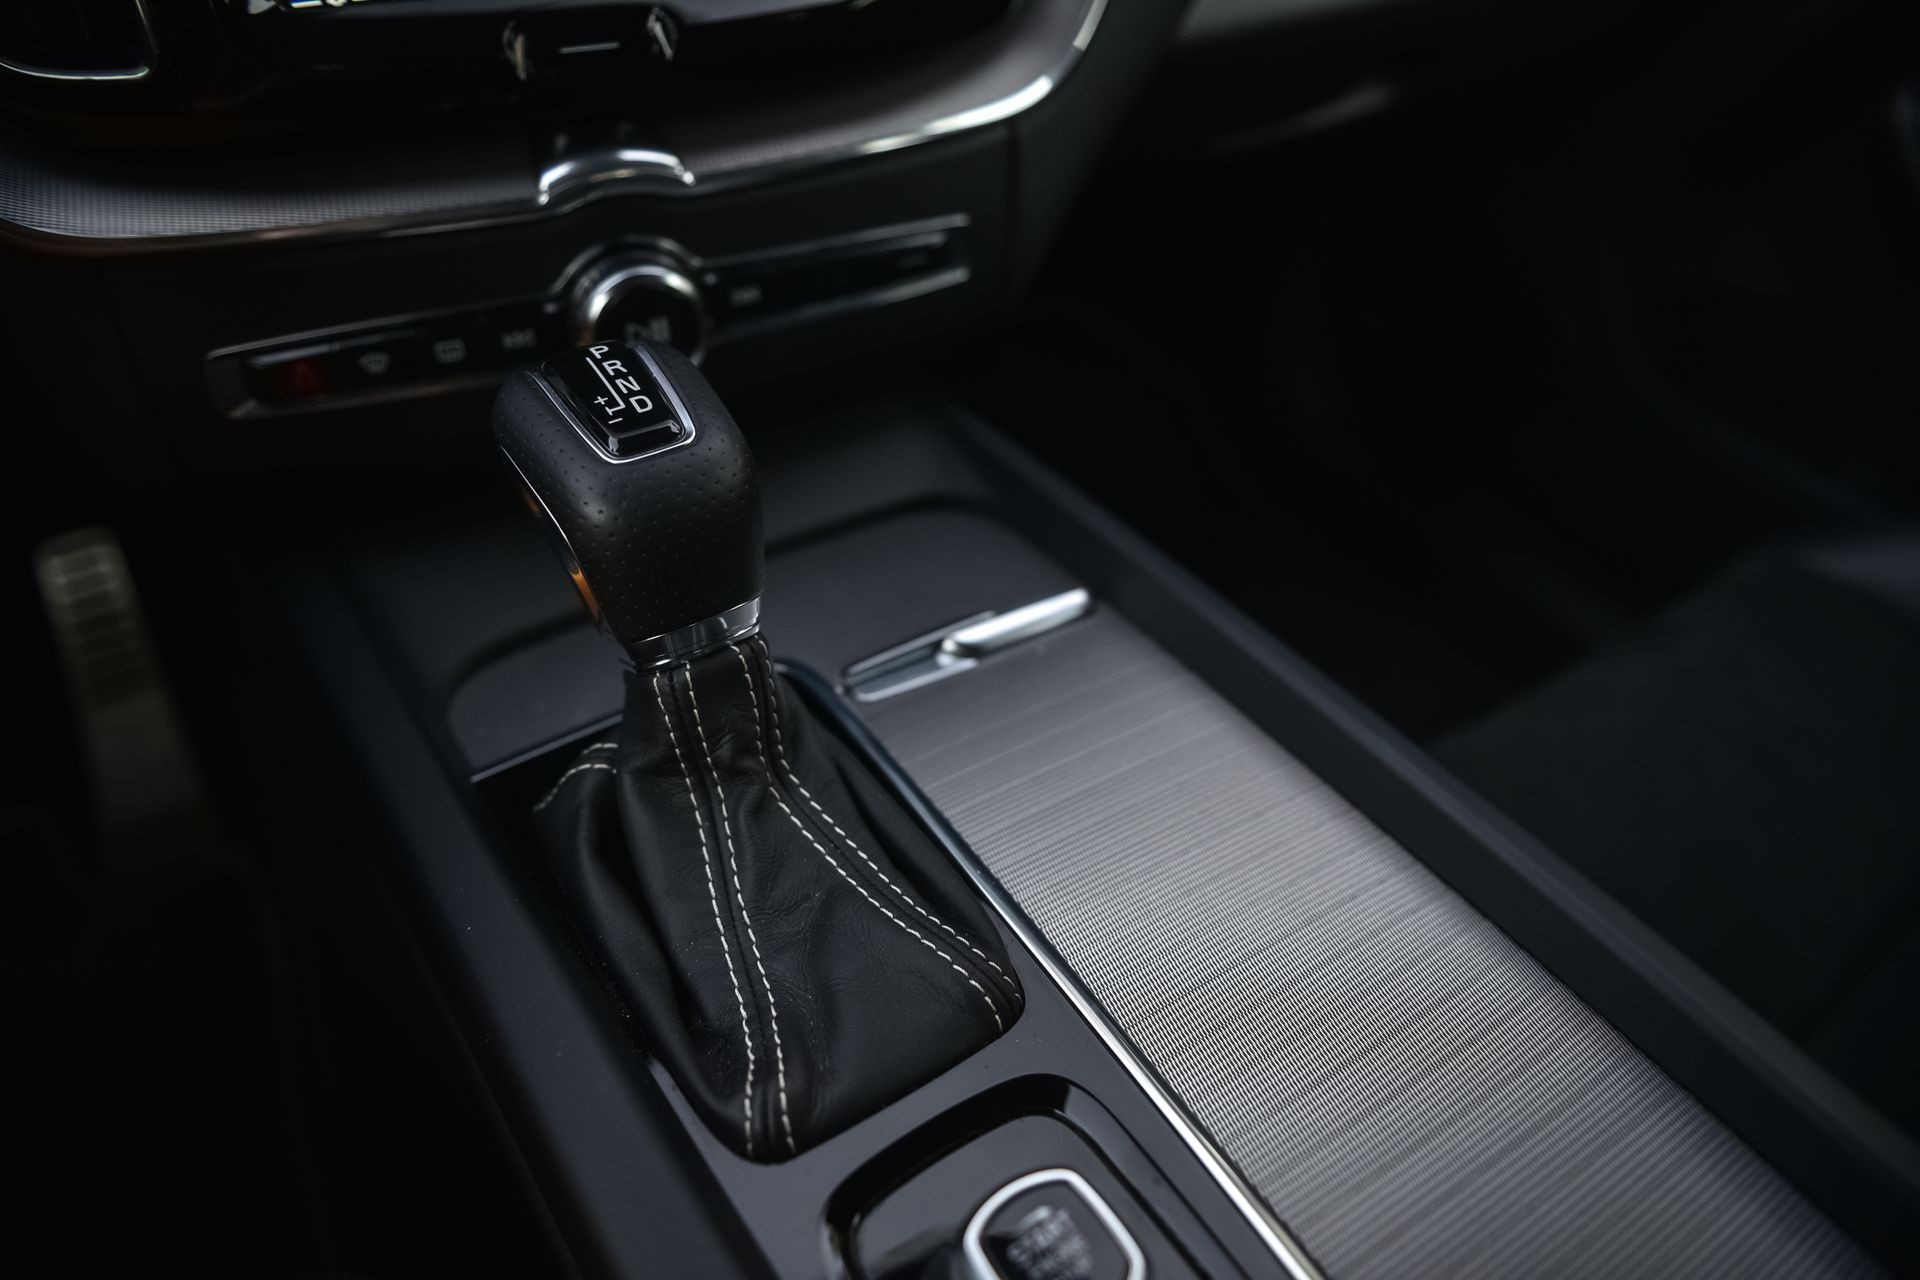 Gear shifter. Automatic transmission.